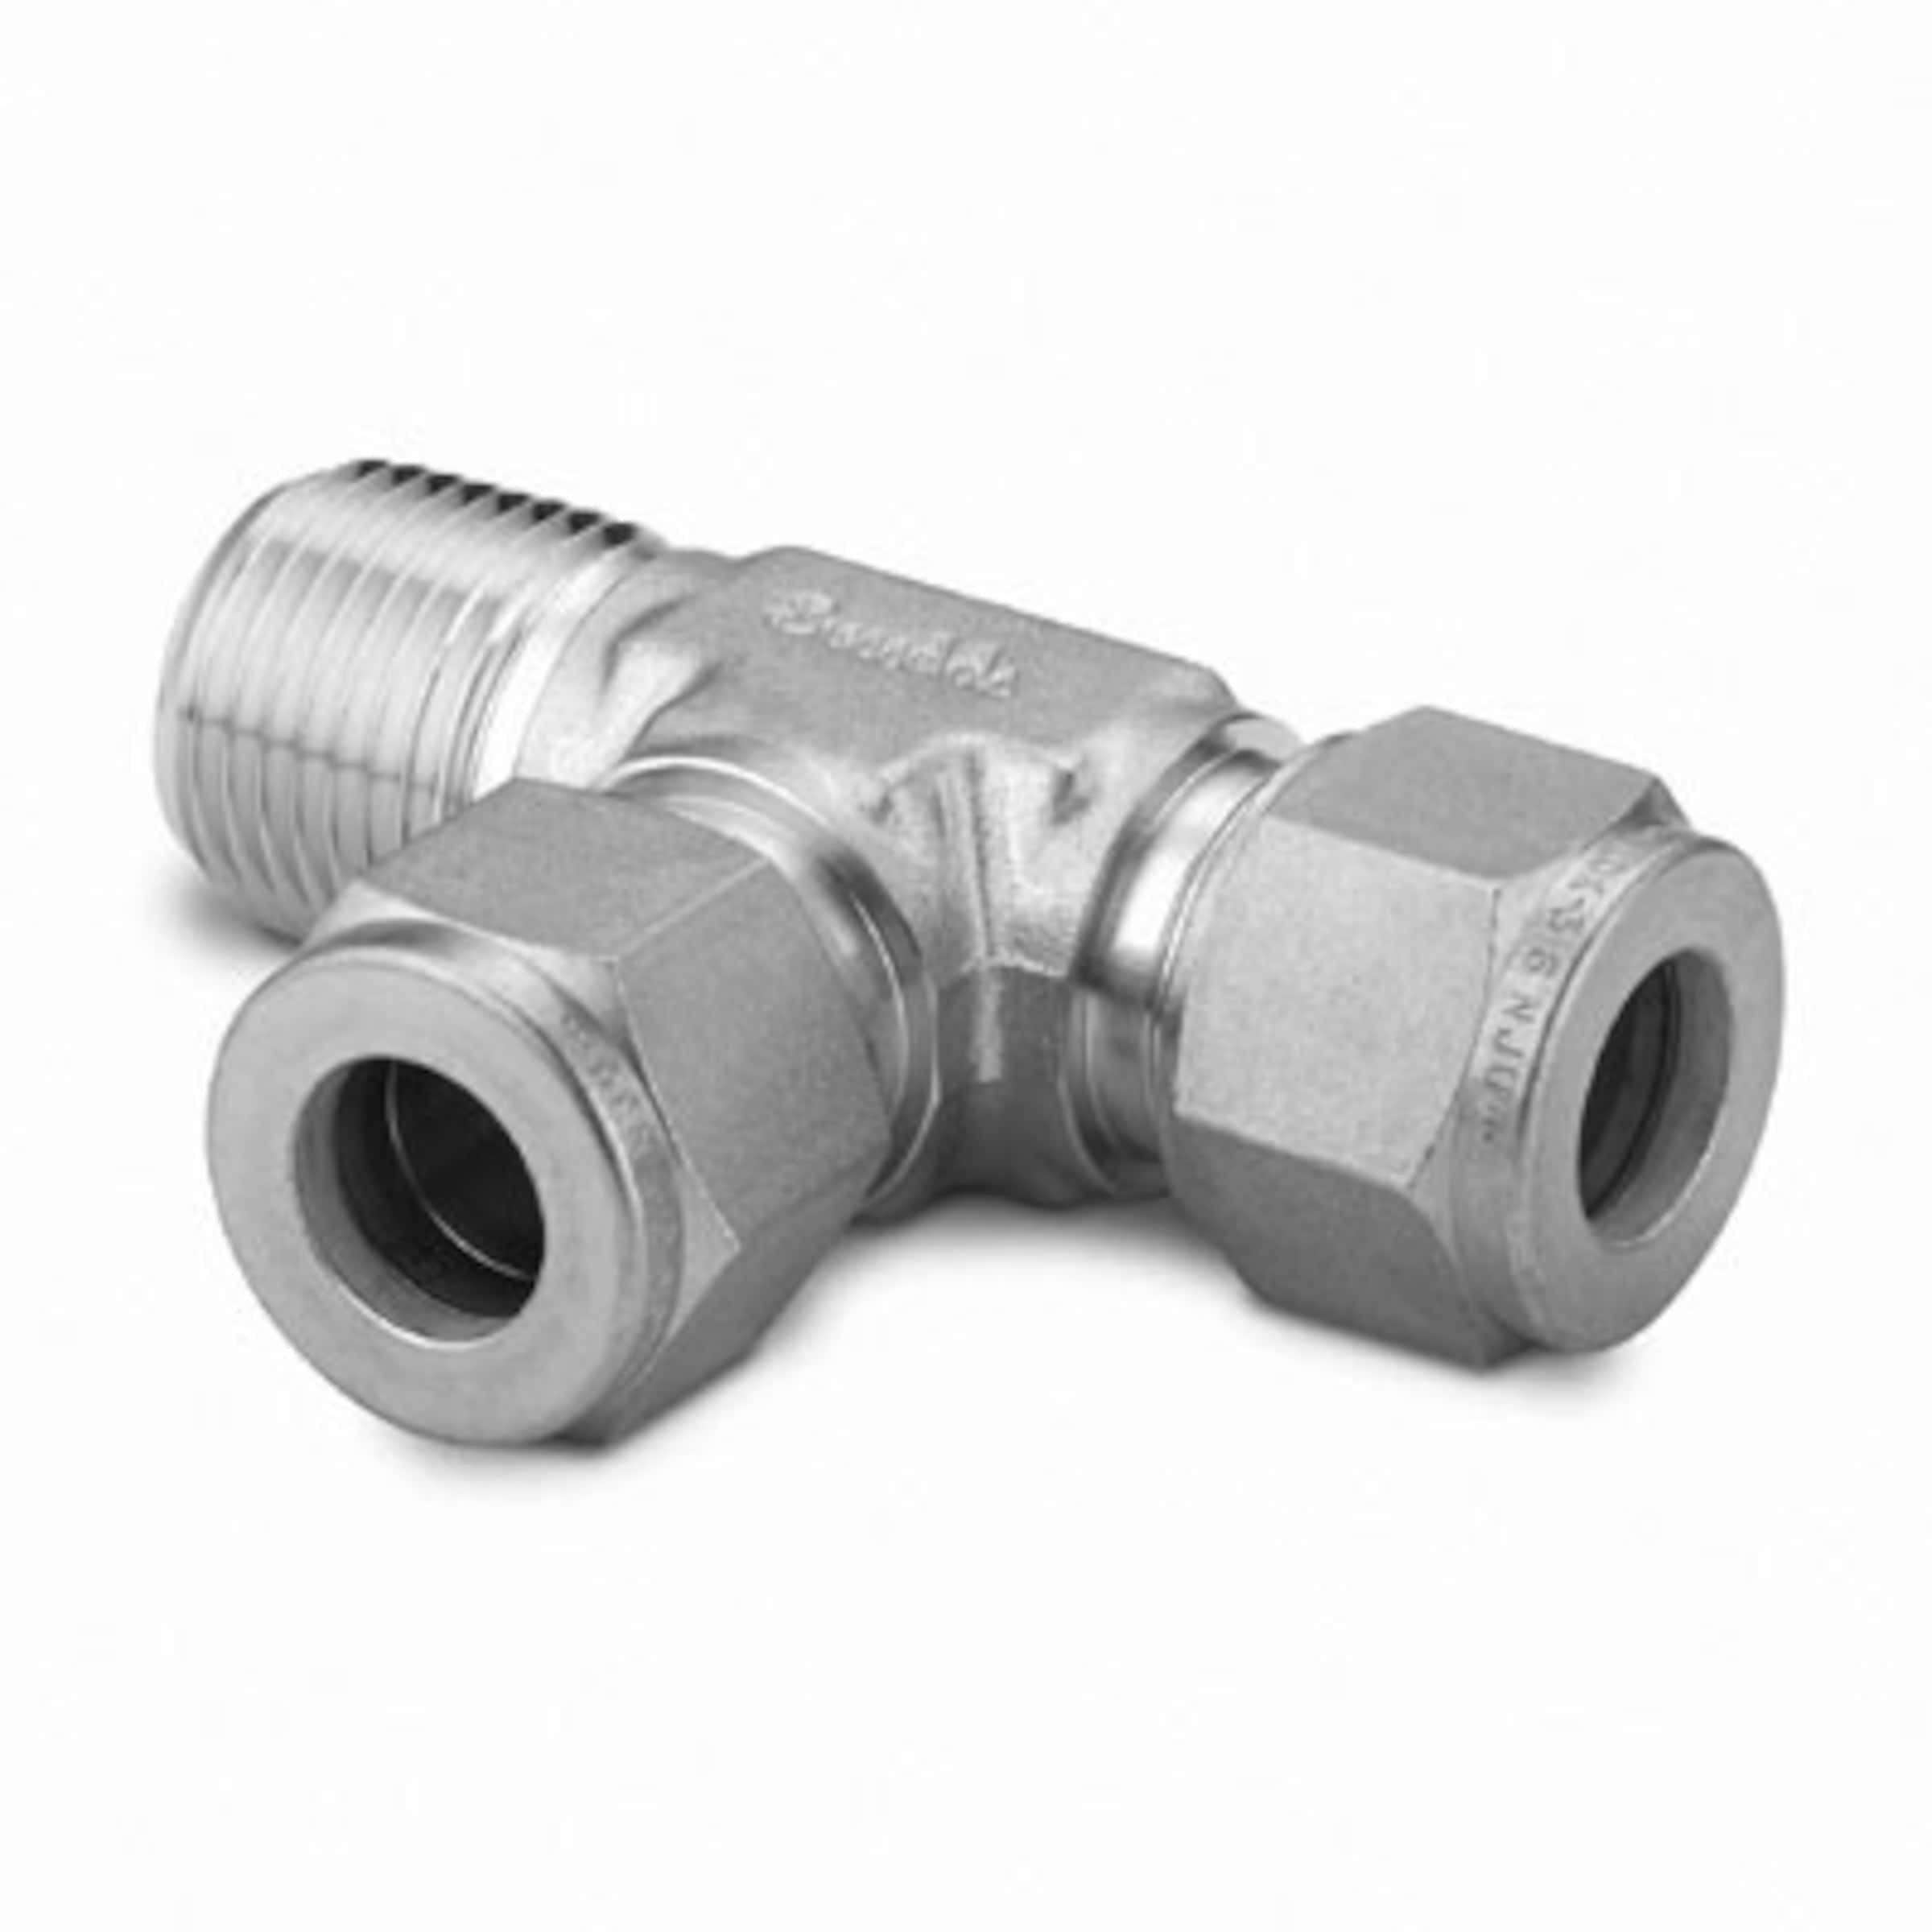 New  Swagelok SS-1610-3 1" Tee Stainless steel Multiple Available